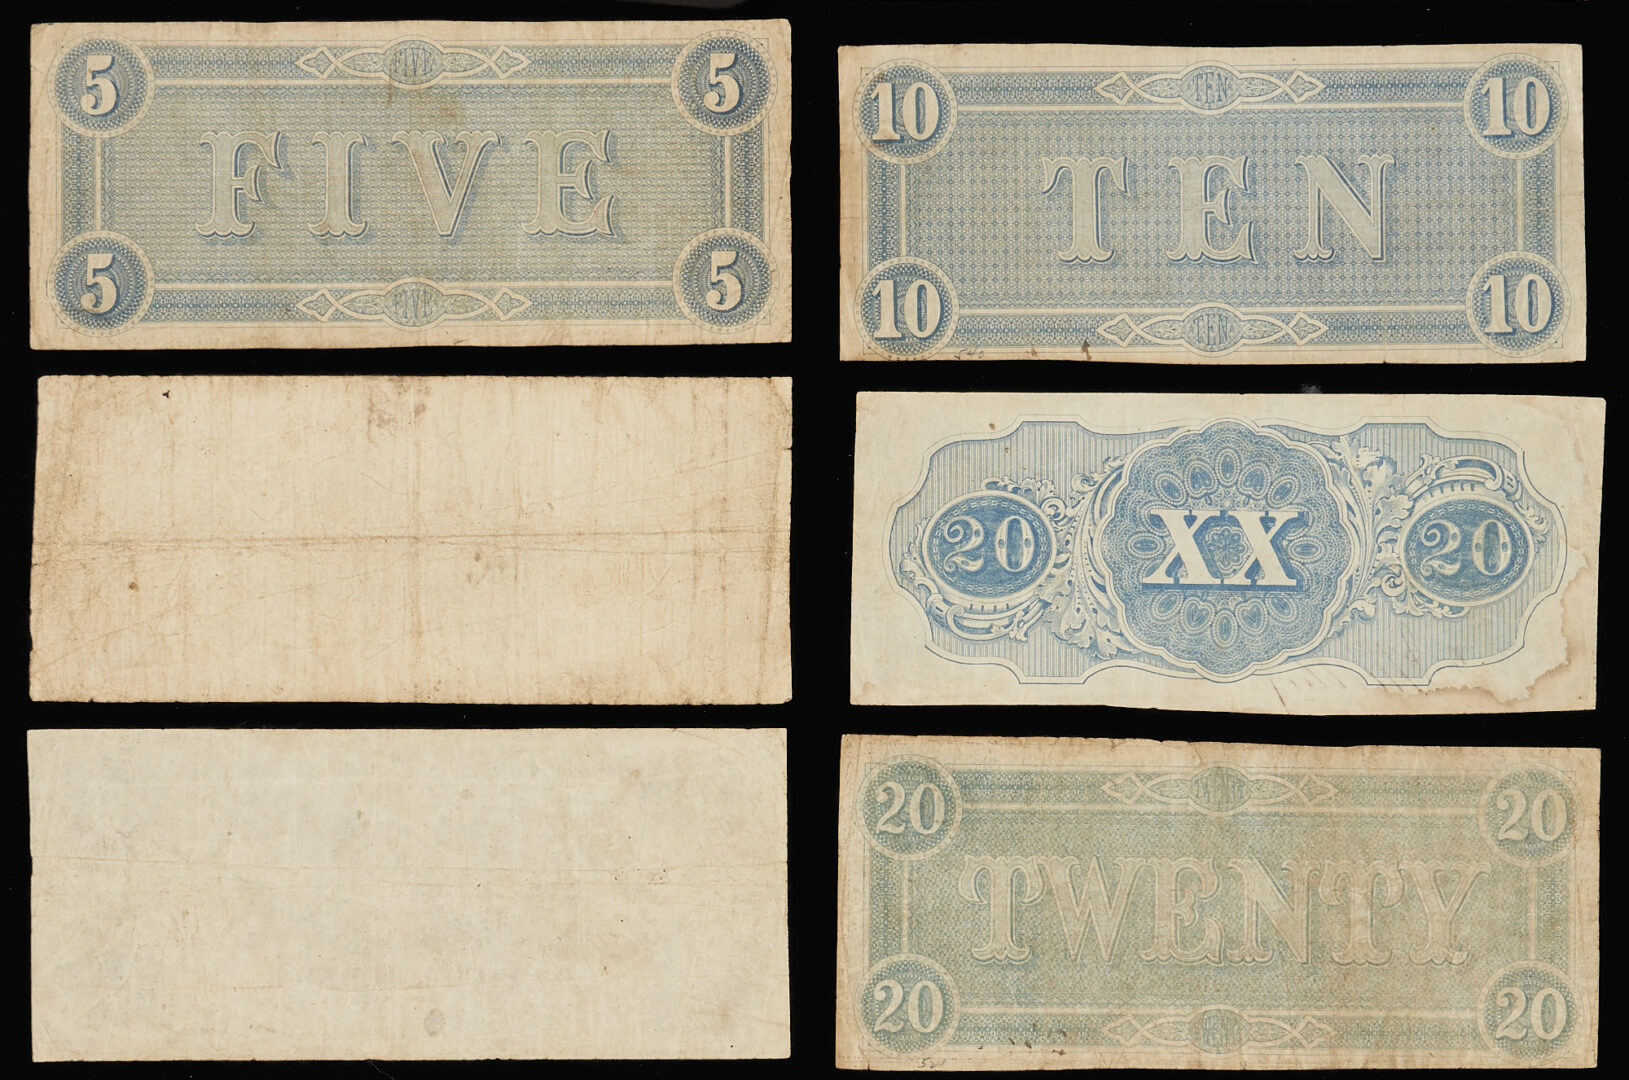 Lot 593: 23 Confederate States Obsolete Currency Notes